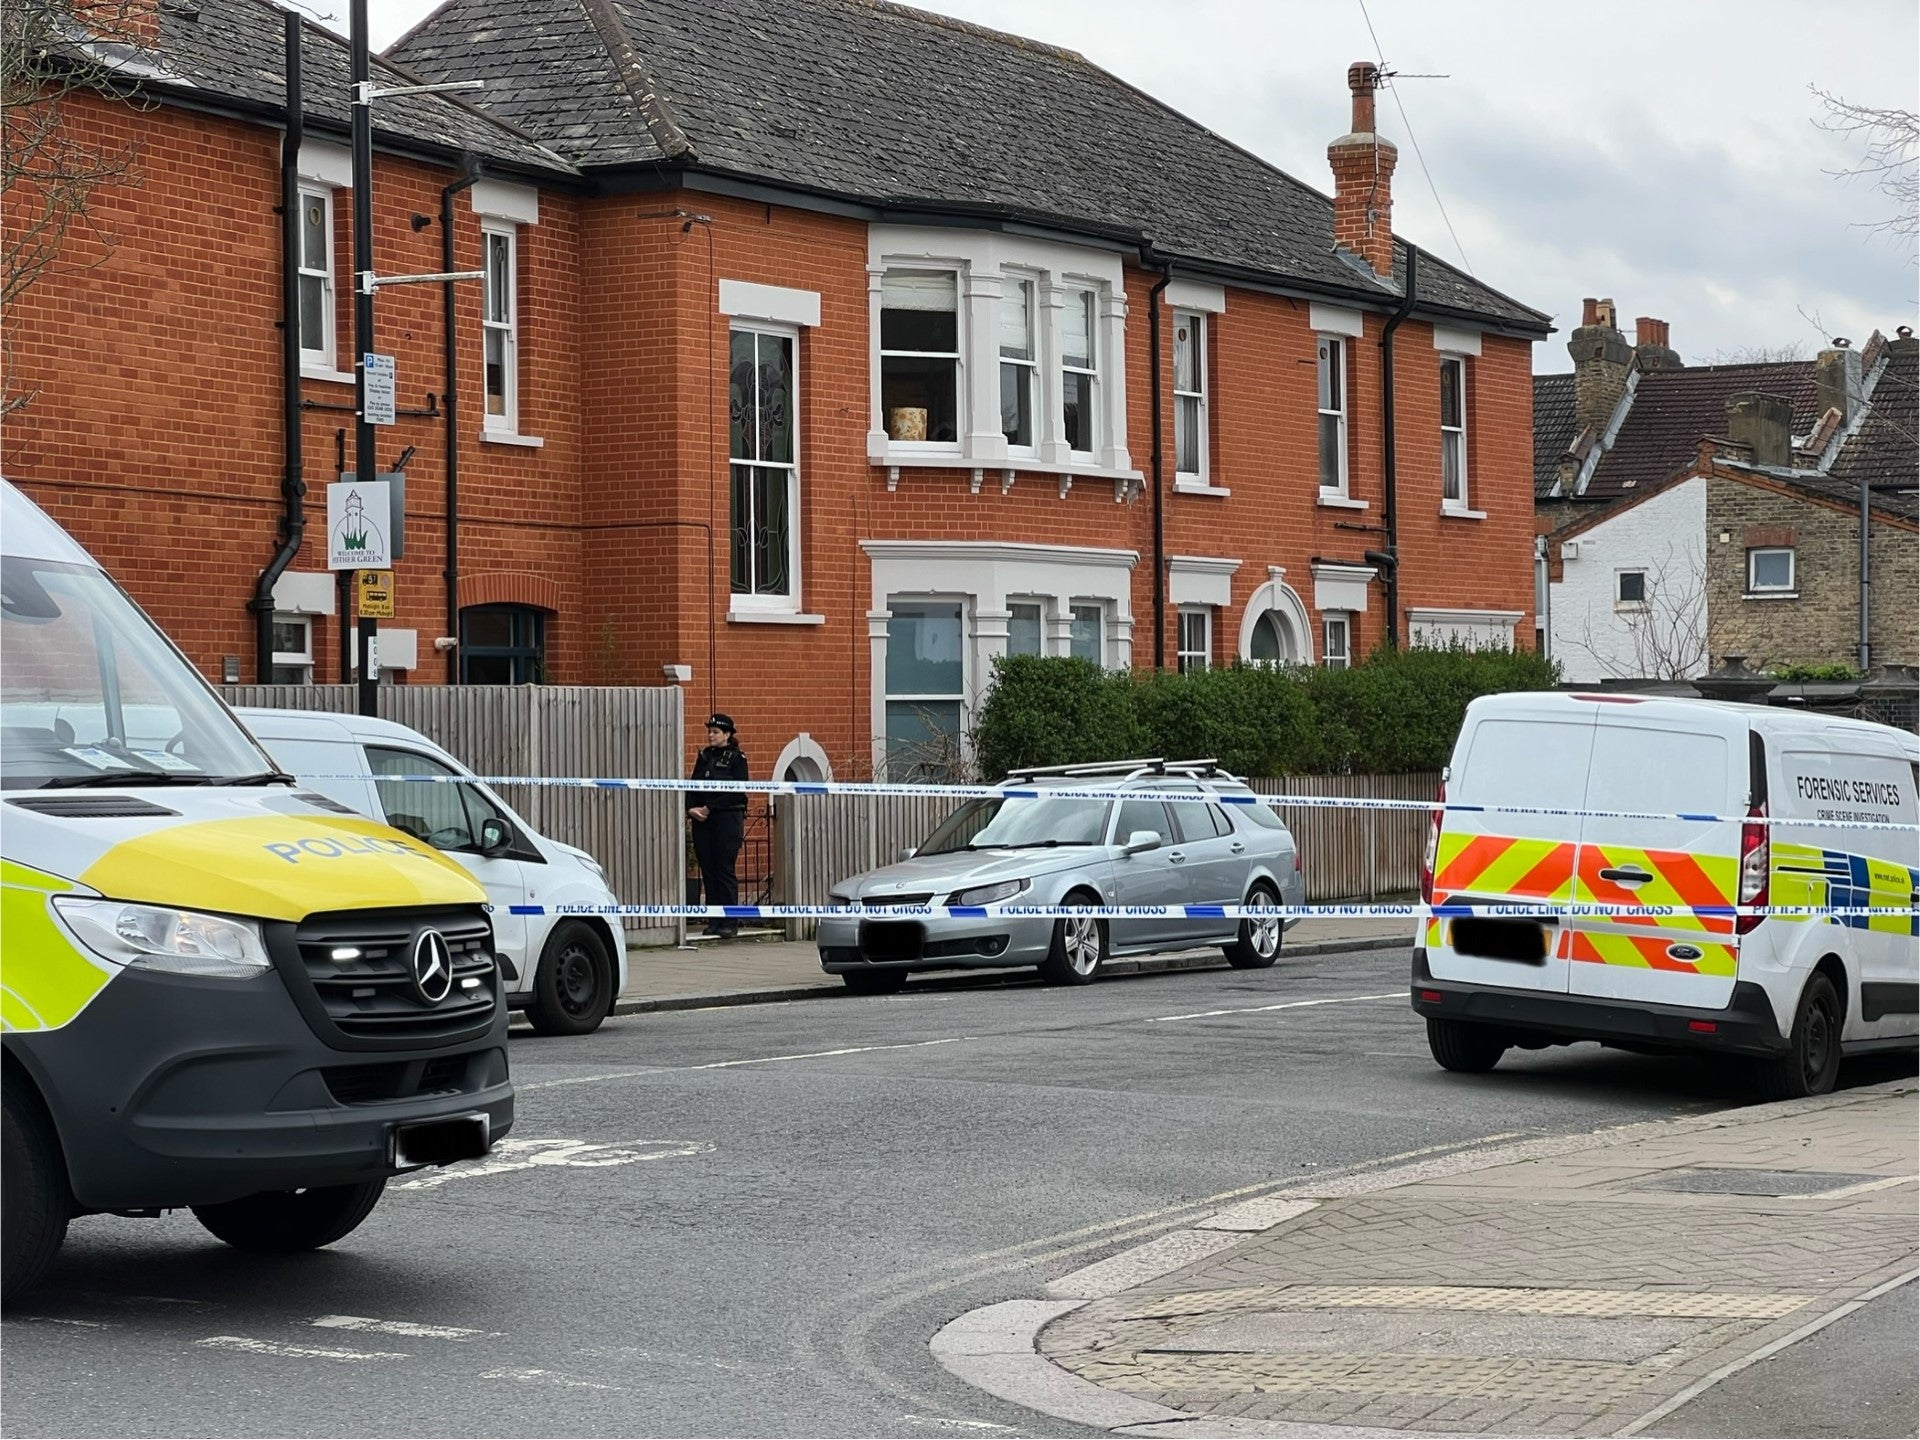 Police have cordoned off an area in Staplehurst Road, Hither Green